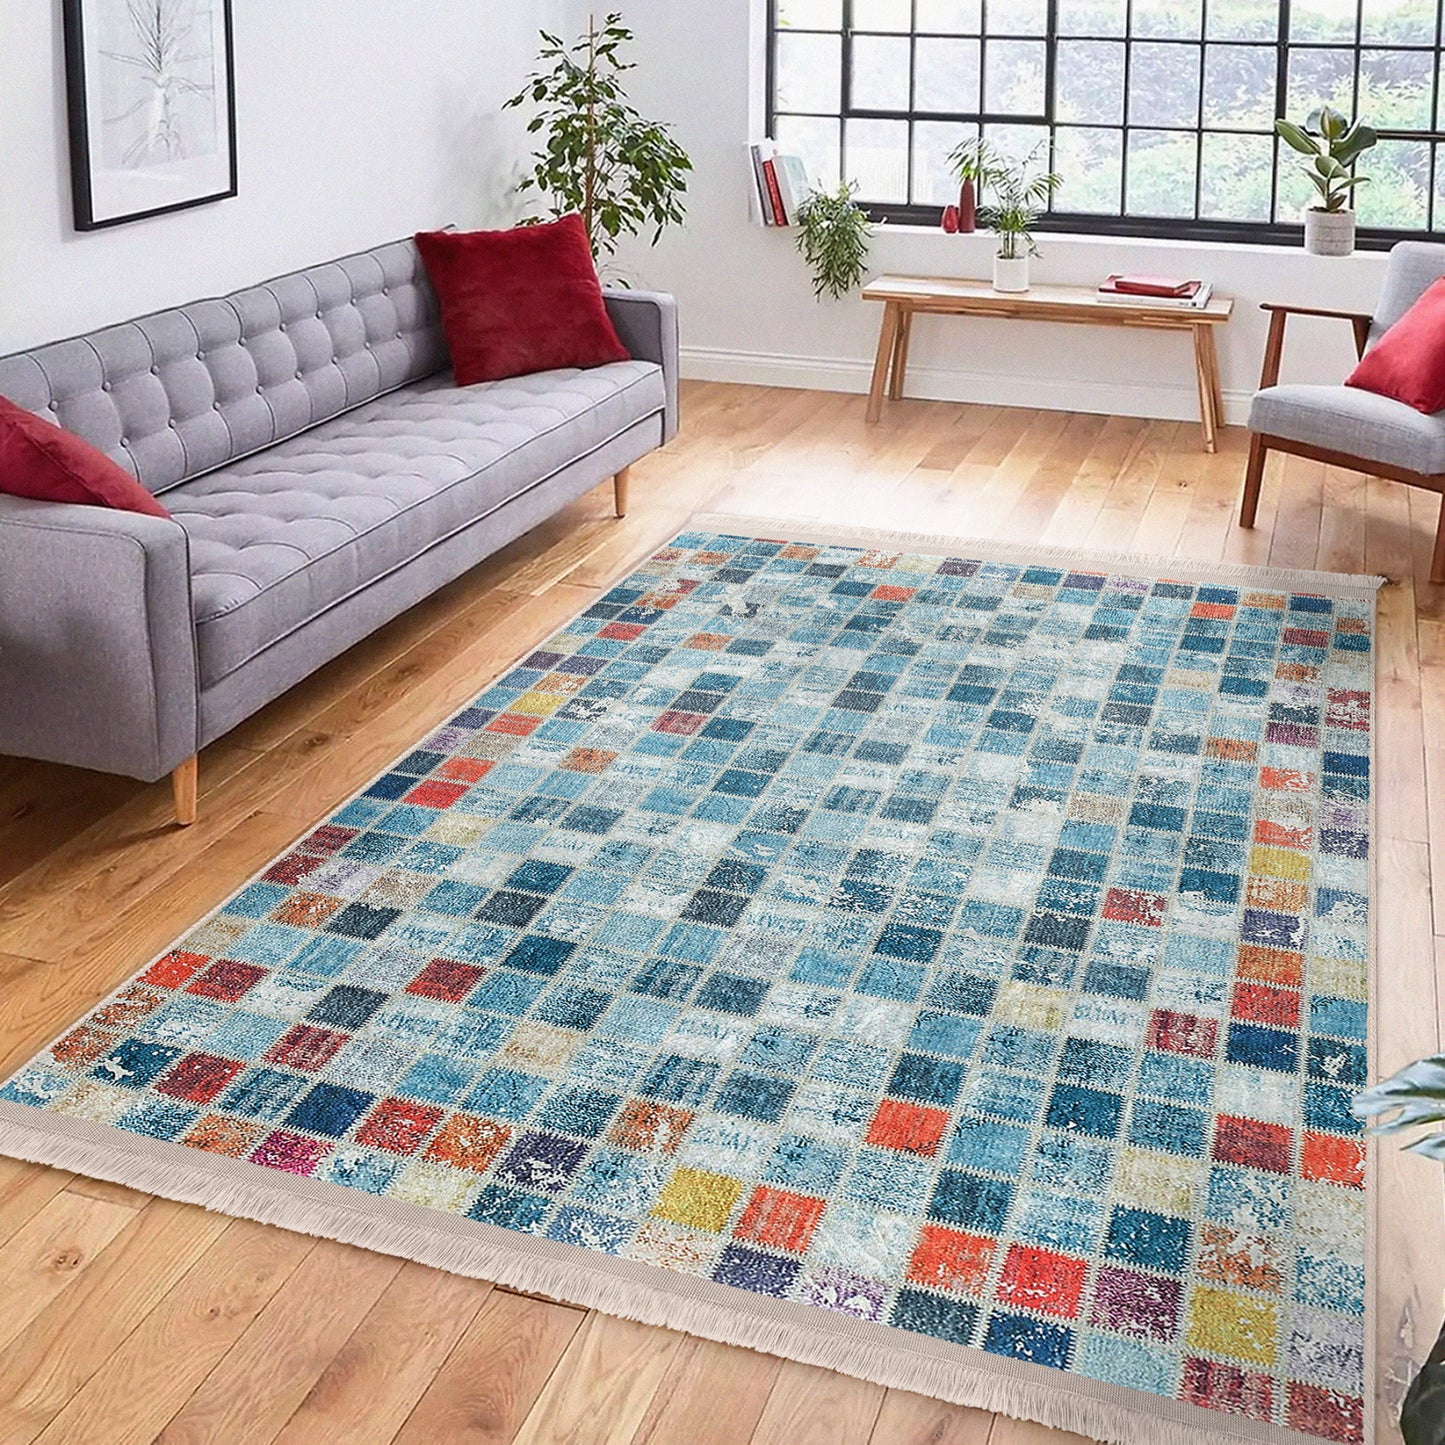 High-Quality Checkered Rug with Farmhouse Pattern